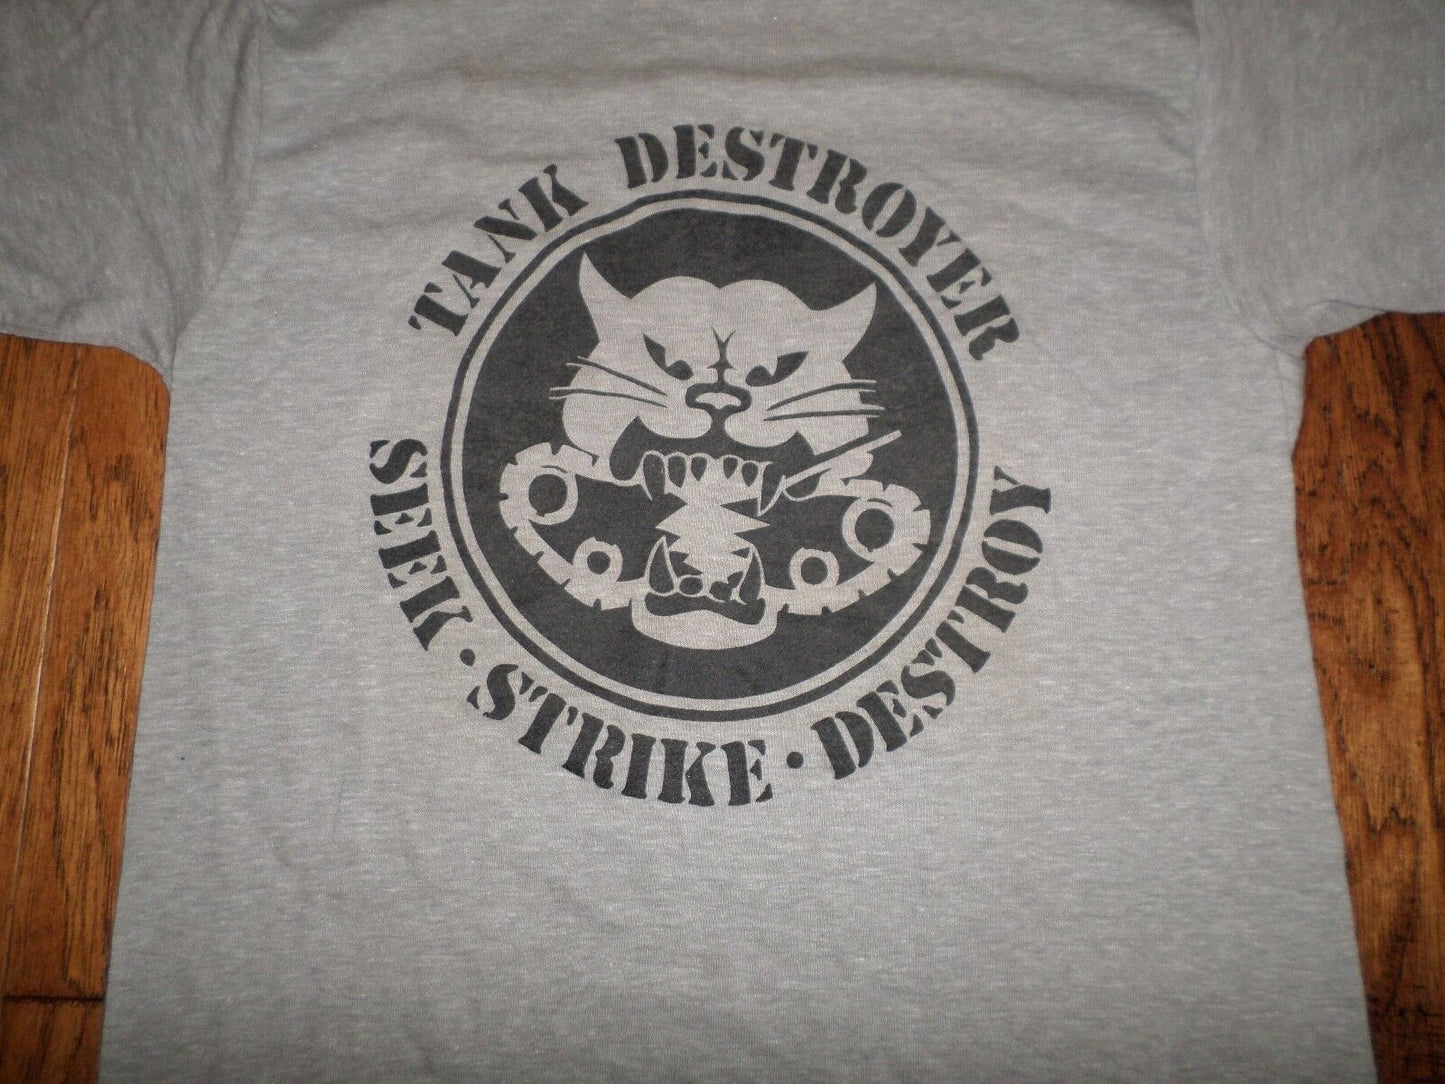 VINTAGE MILITARY TANK DESTROYER T- SHIRT MADE IN THE U.S.A BY T CHED SIZE SMALL